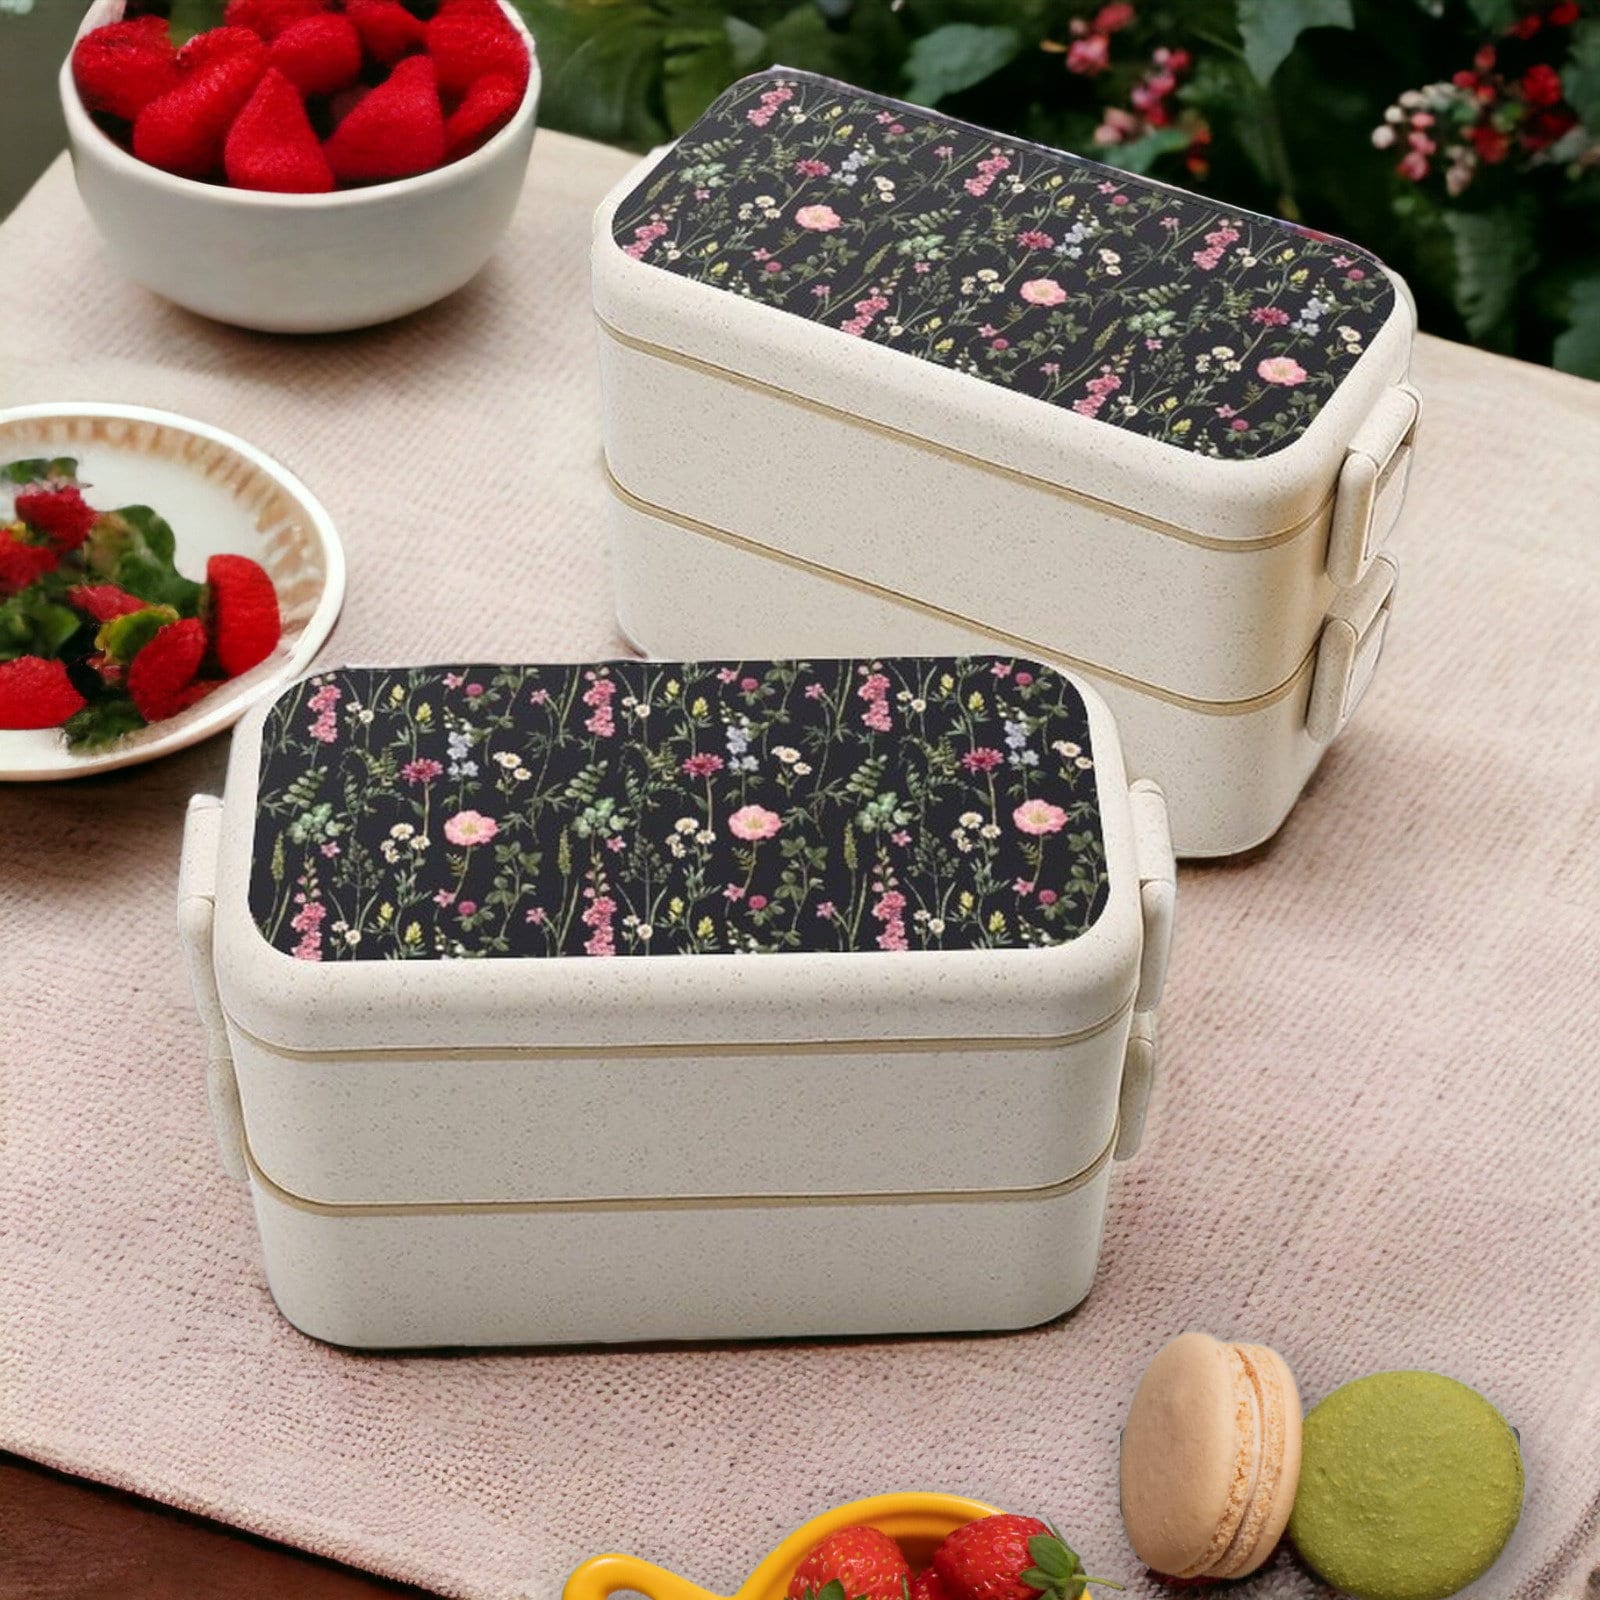 Windfall Japanese Bento Box, Wheat Straw Portable Leakproof Lunch Box,  Microwave Lunch Box Spoon Chopsticks Wheat Straw Food Storage Container